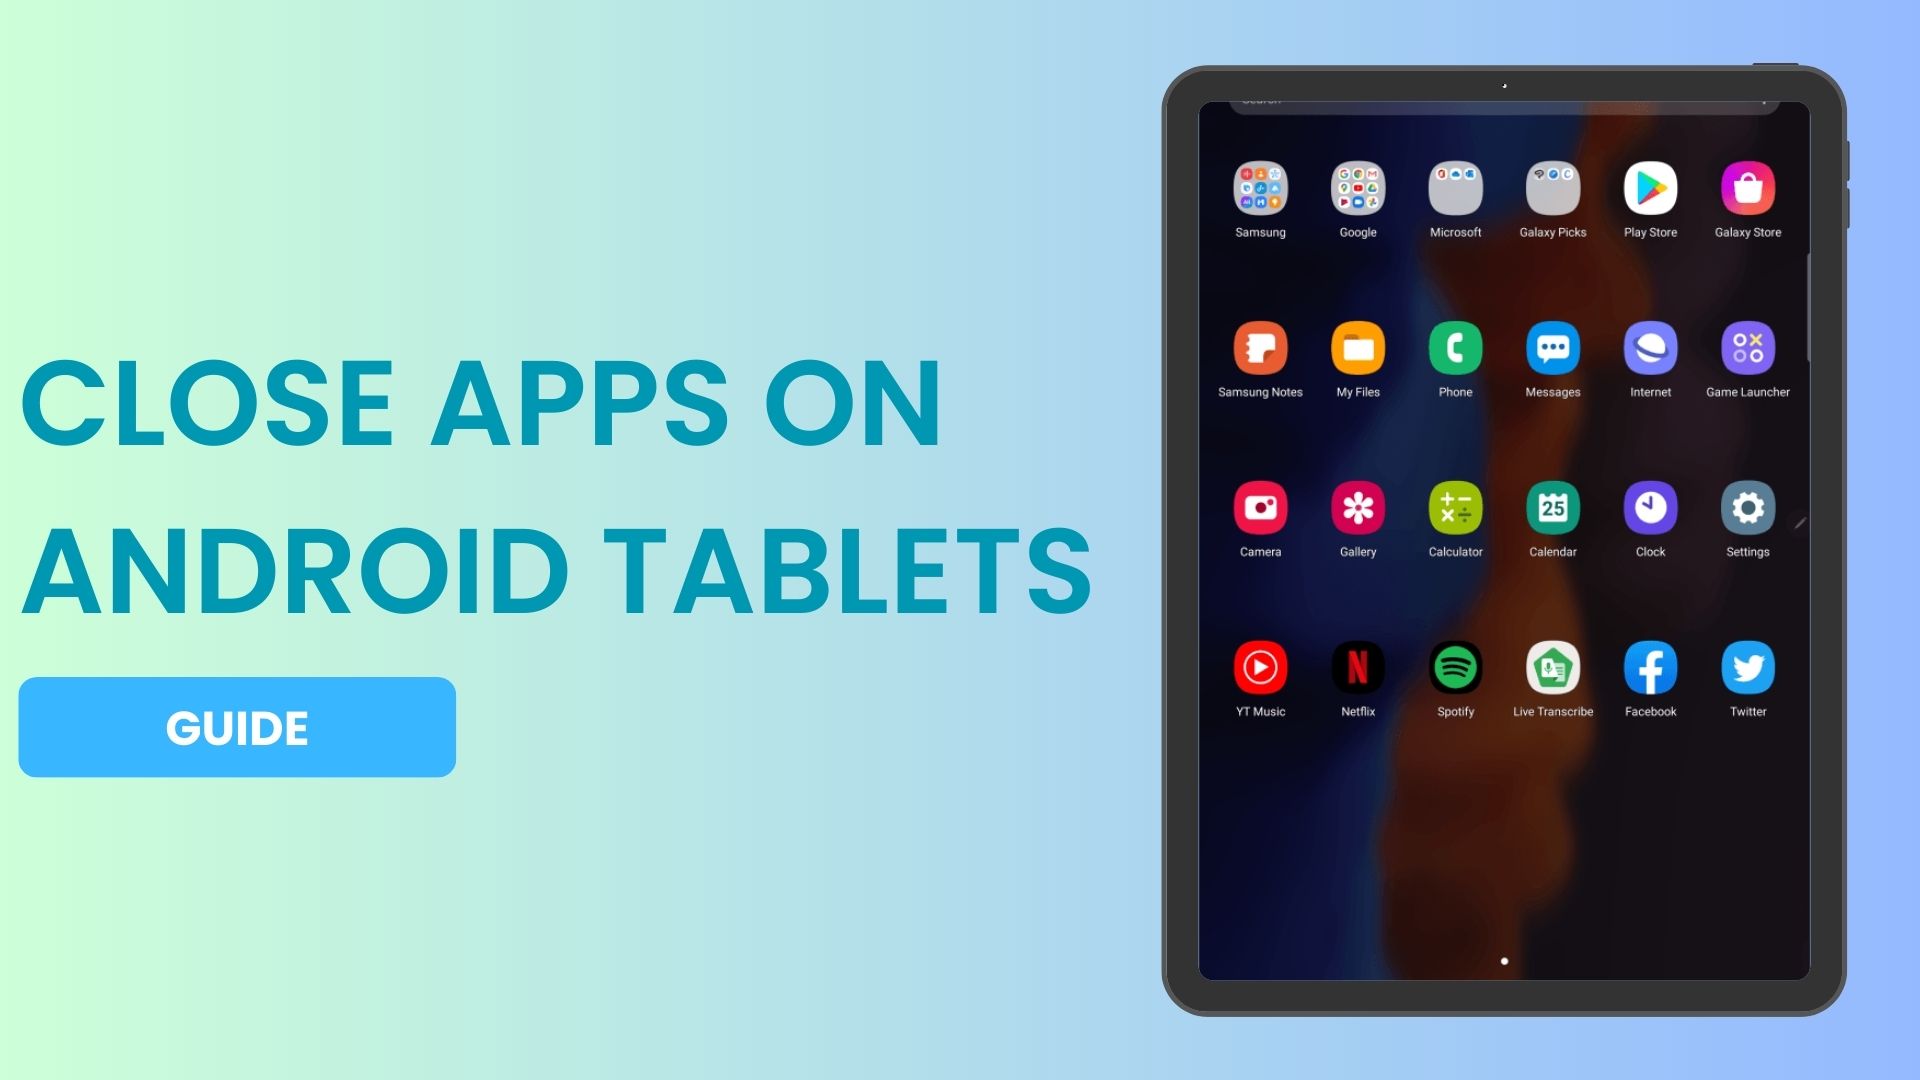 How to close apps on Android tablets